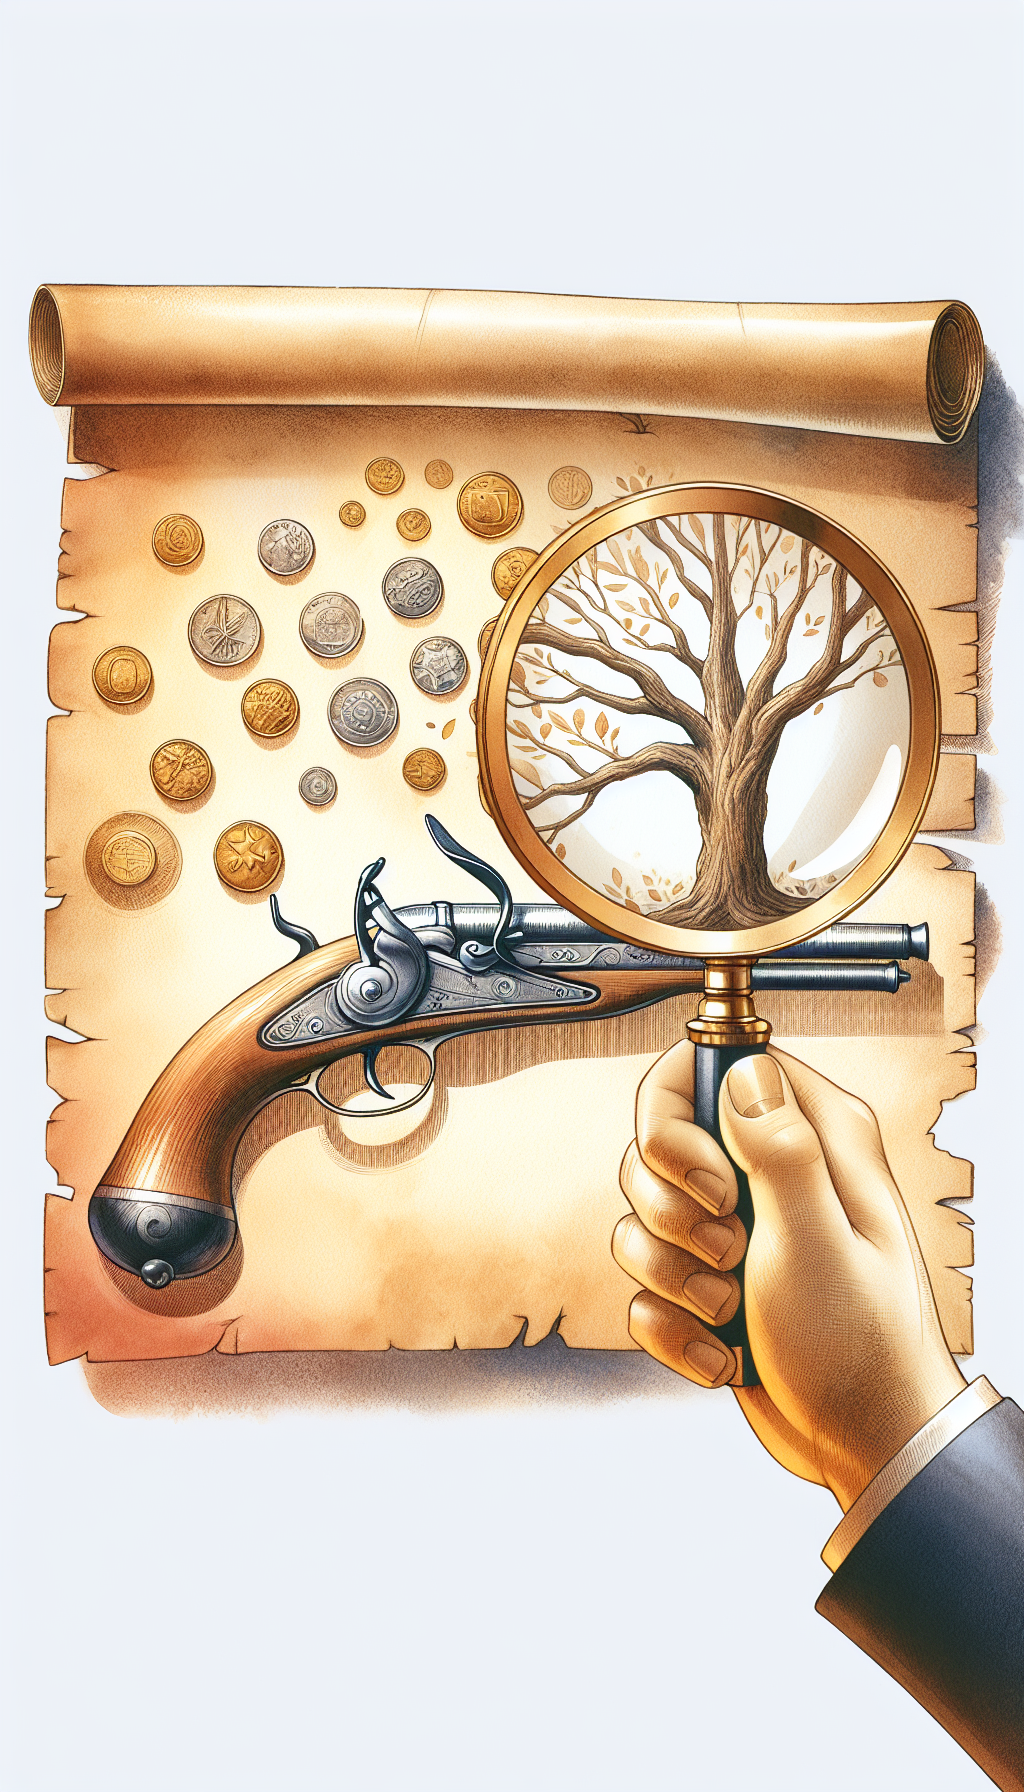 An illustration depicts a magnifying glass hovering over a timeworn scroll, where a classic flintlock pistol rests, its contour hinting at an age chart with growth rings like a tree's, each ring labeled with historical eras. Floating coins cast shadows on the parchment, symbolizing the firearm's value; the whole image subtly blending watercolor shades with crisp, golden line art details.